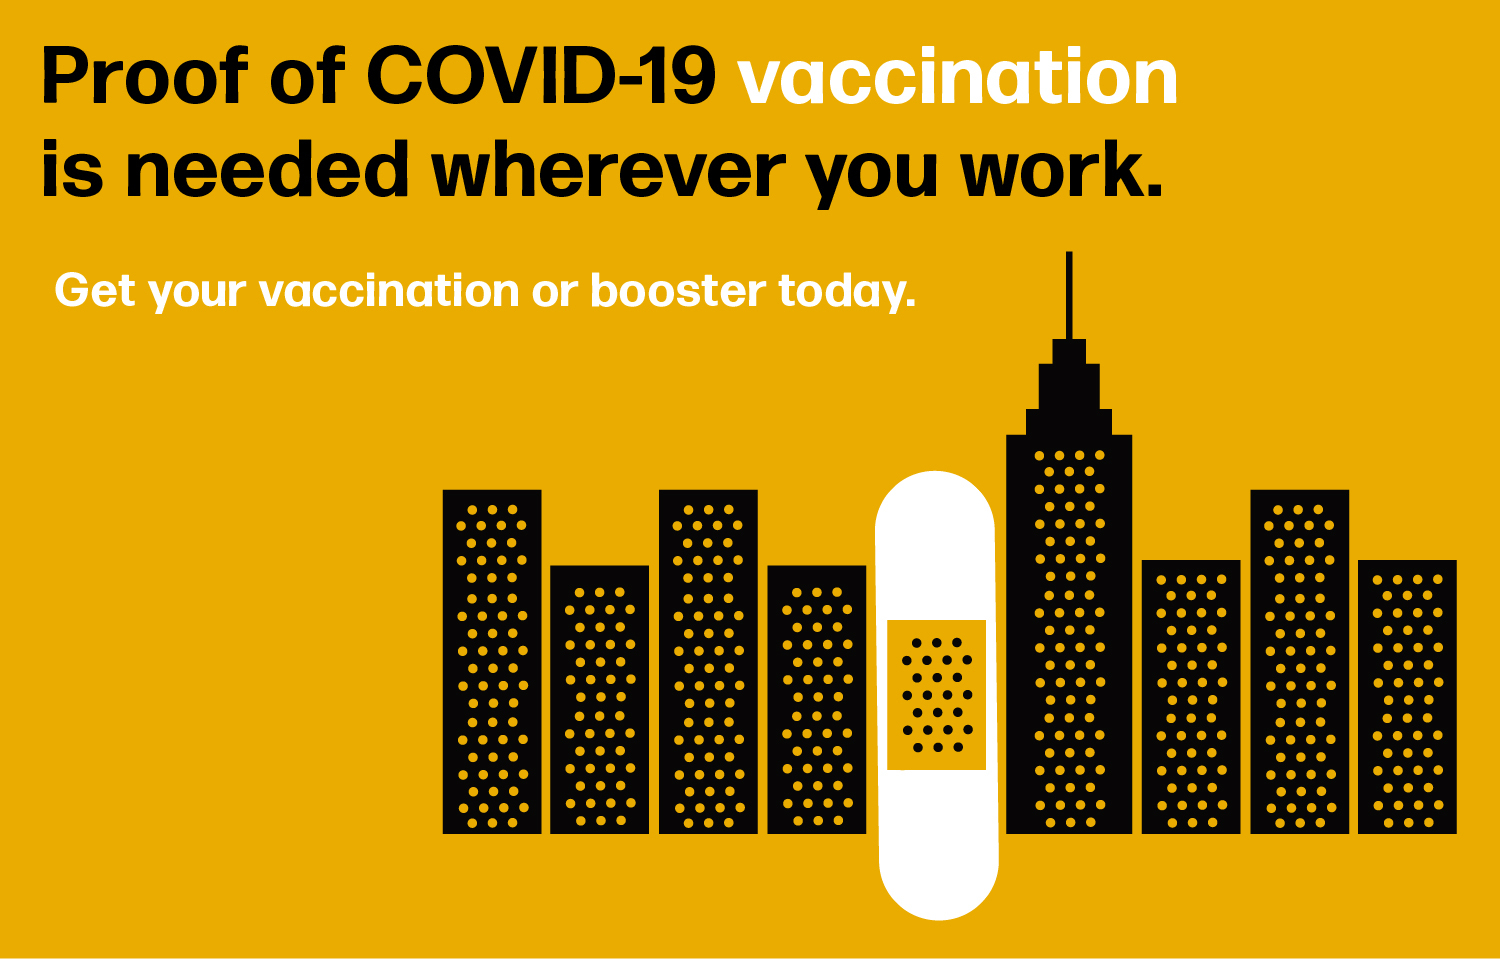 City skyline, with bandaid image. COVID vaccination needed wherever you work.
                                           